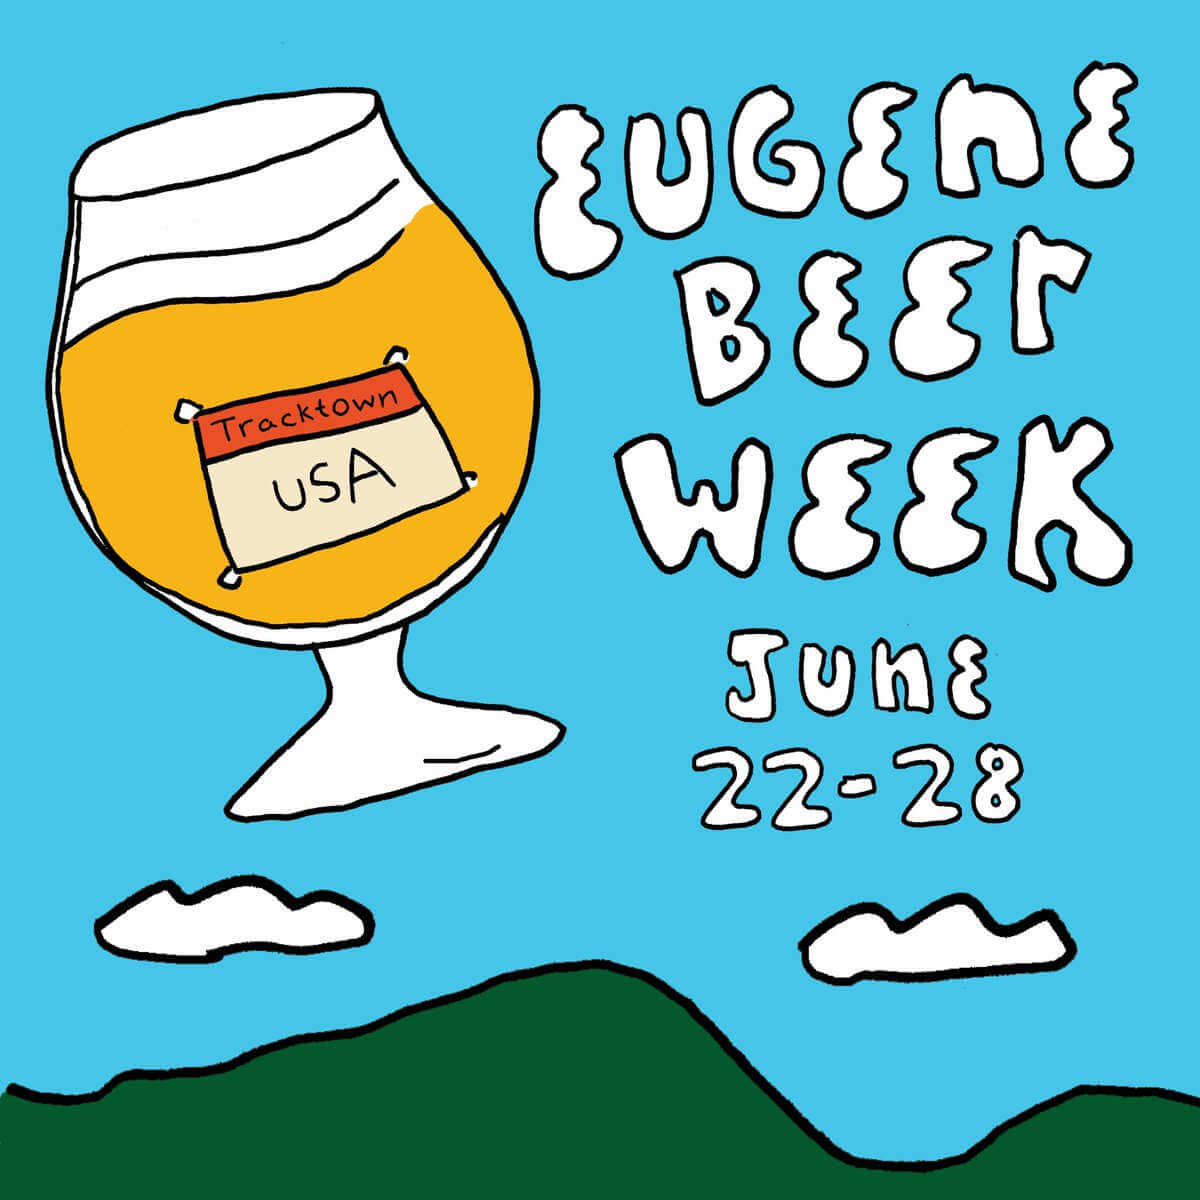 Eugene Beer Week is going on now; 10th annual event runs June 22–28